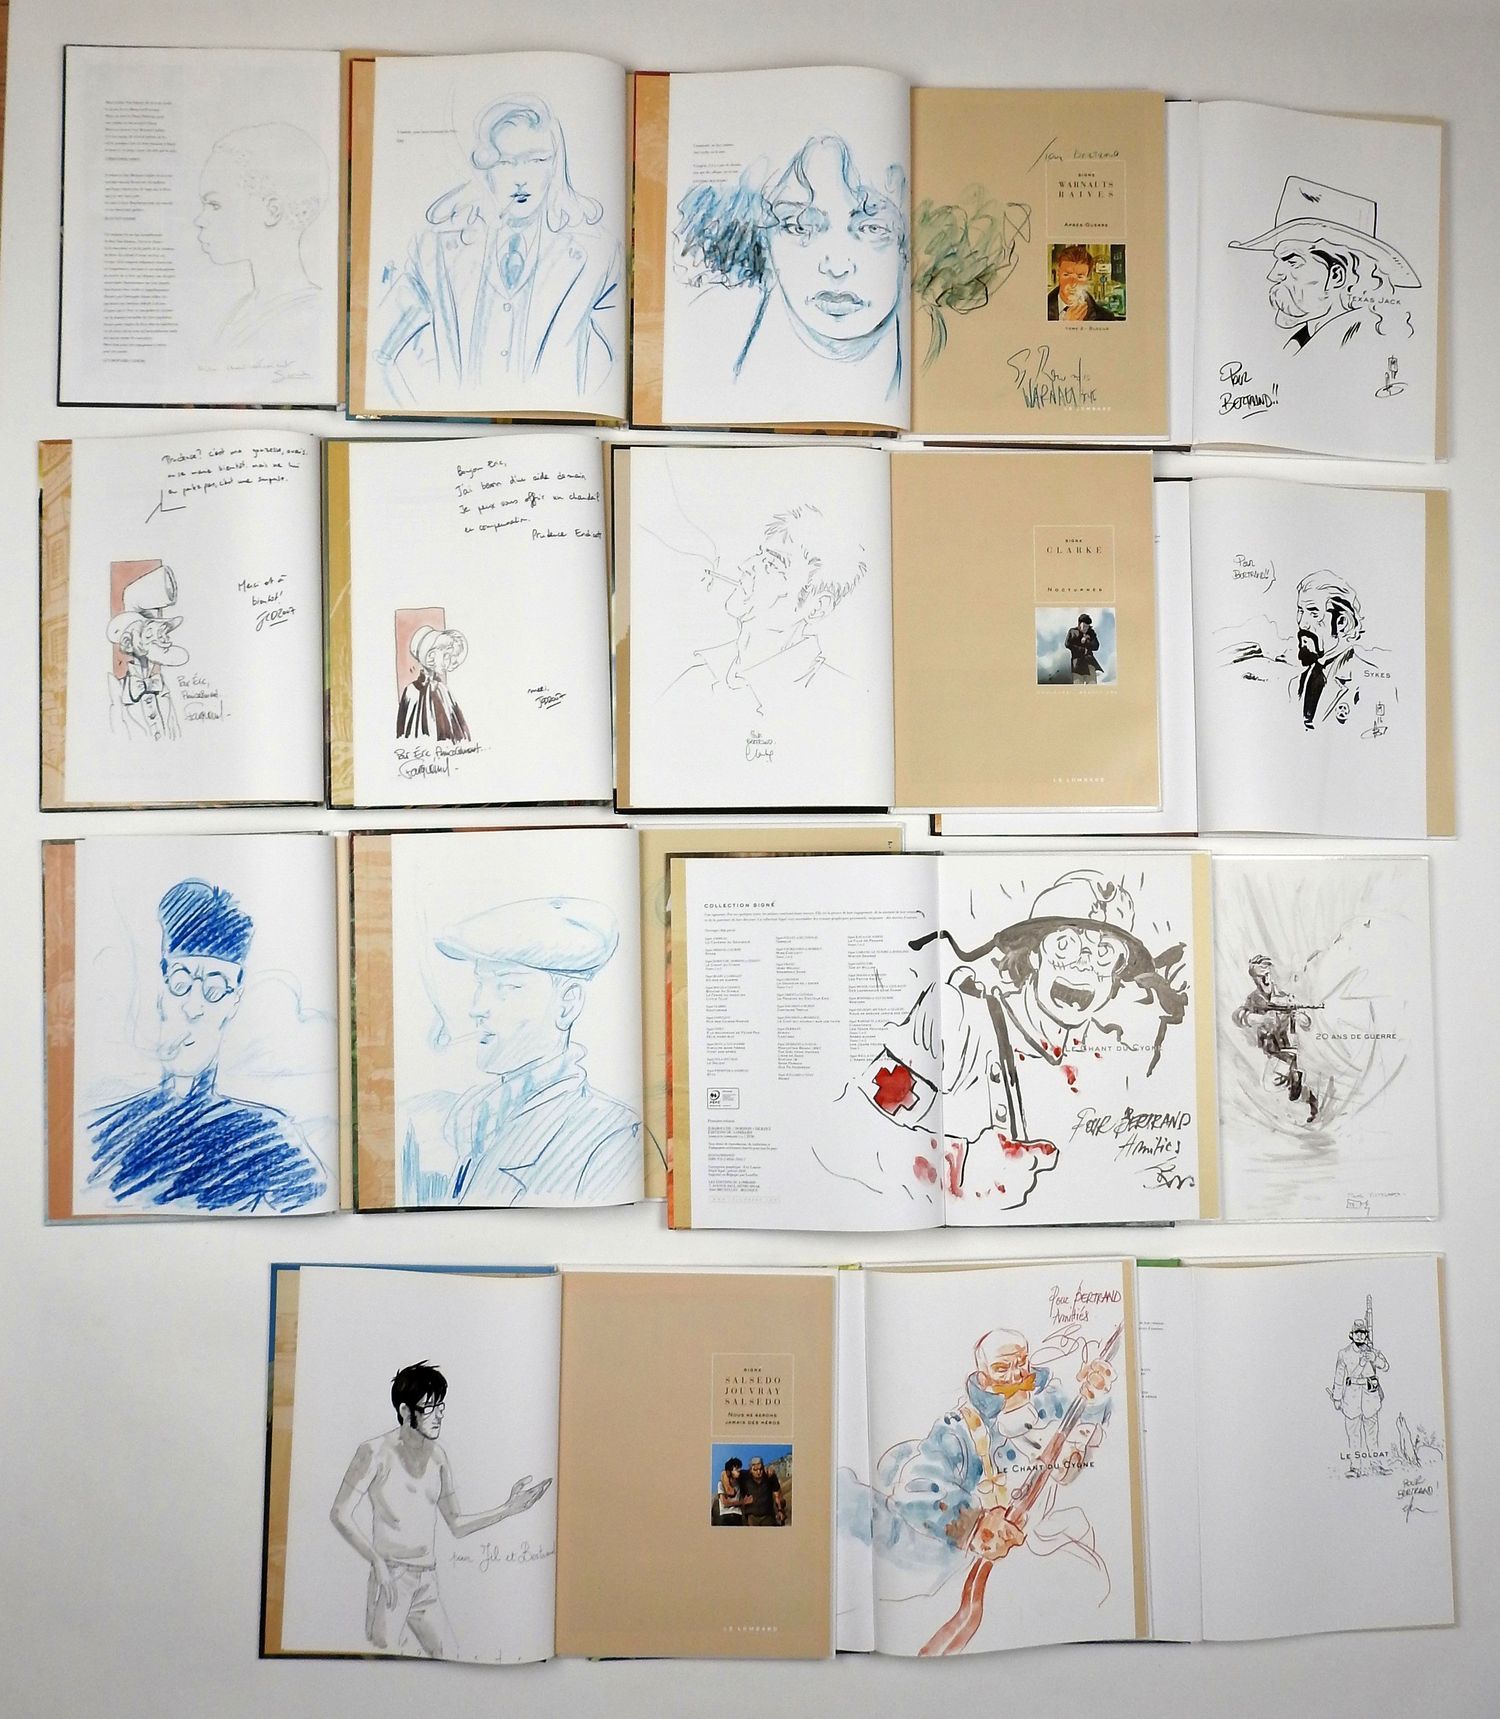 Null LOMBARD

Set of 18 albums from the Signed collection with drawings by Lefeu&hellip;